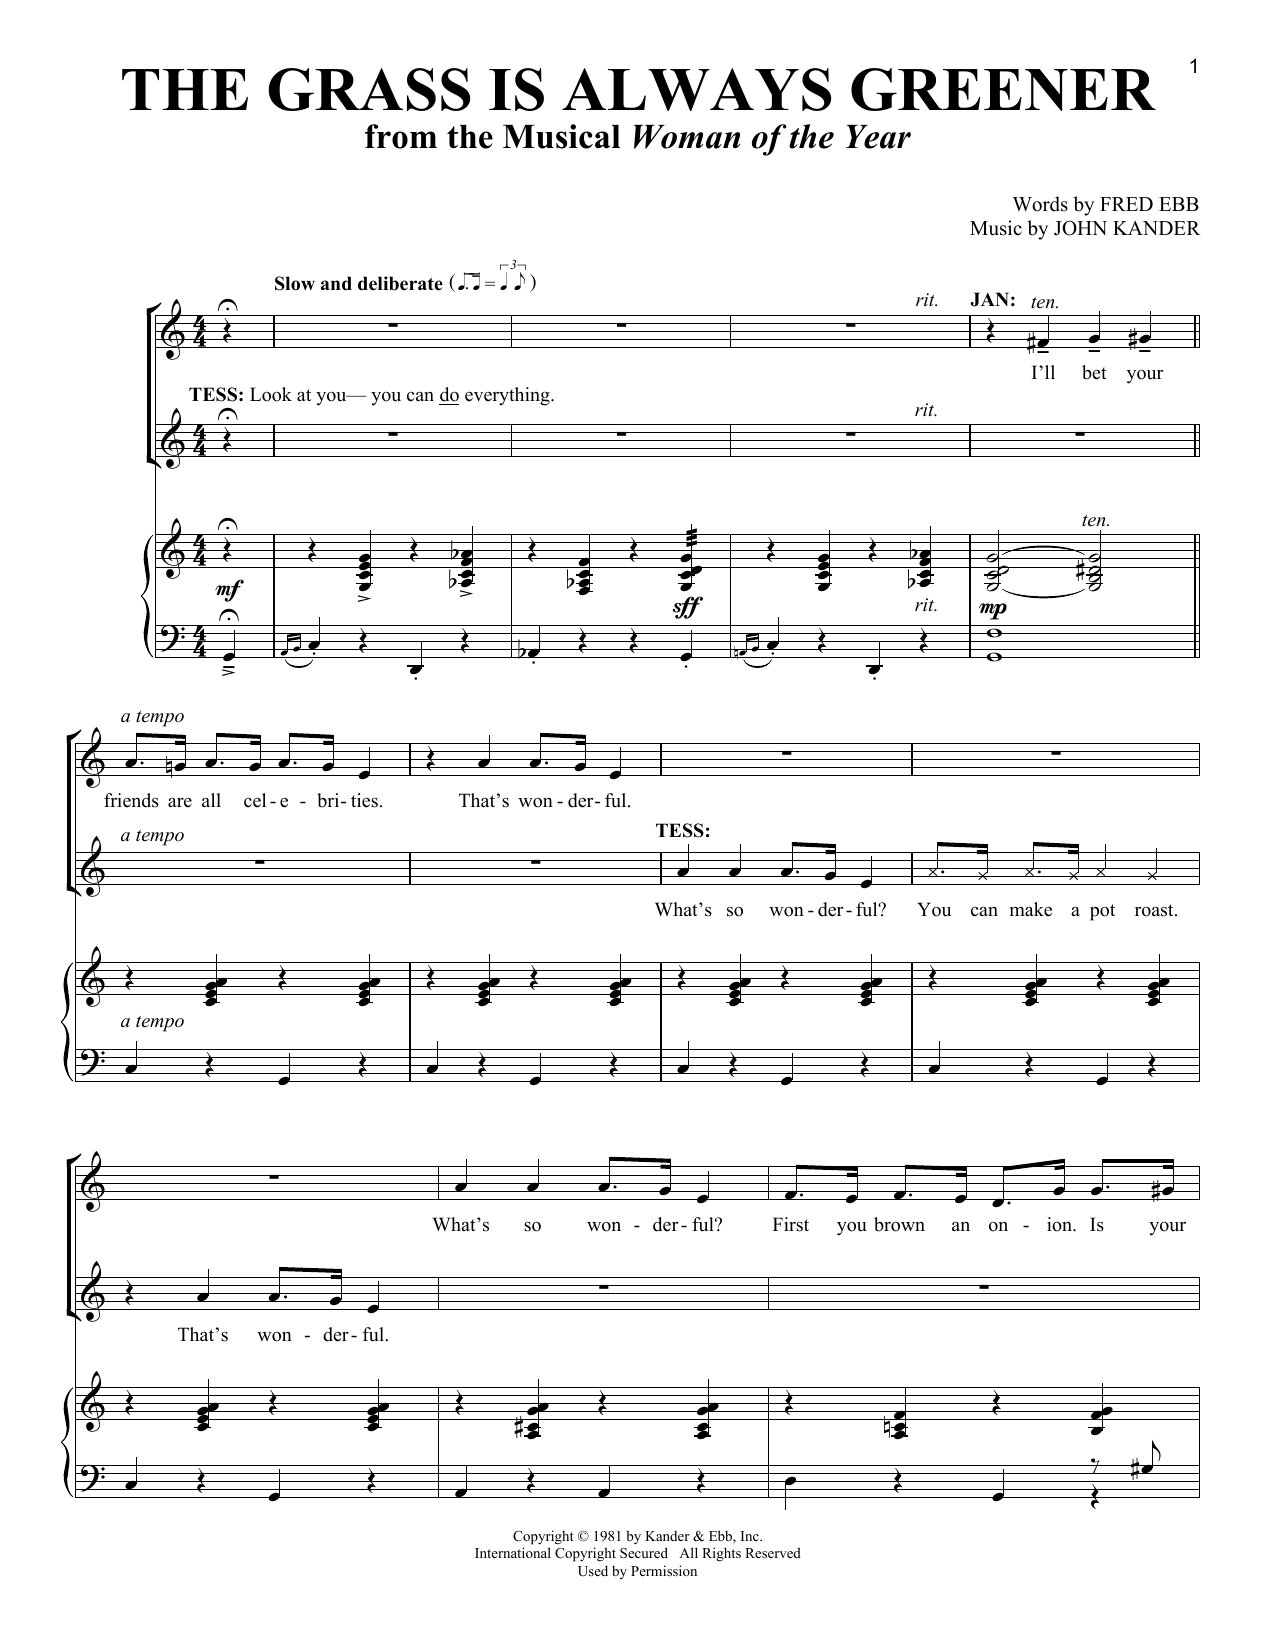 Fred Ebb The Grass Is Always Greener sheet music notes and chords. Download Printable PDF.